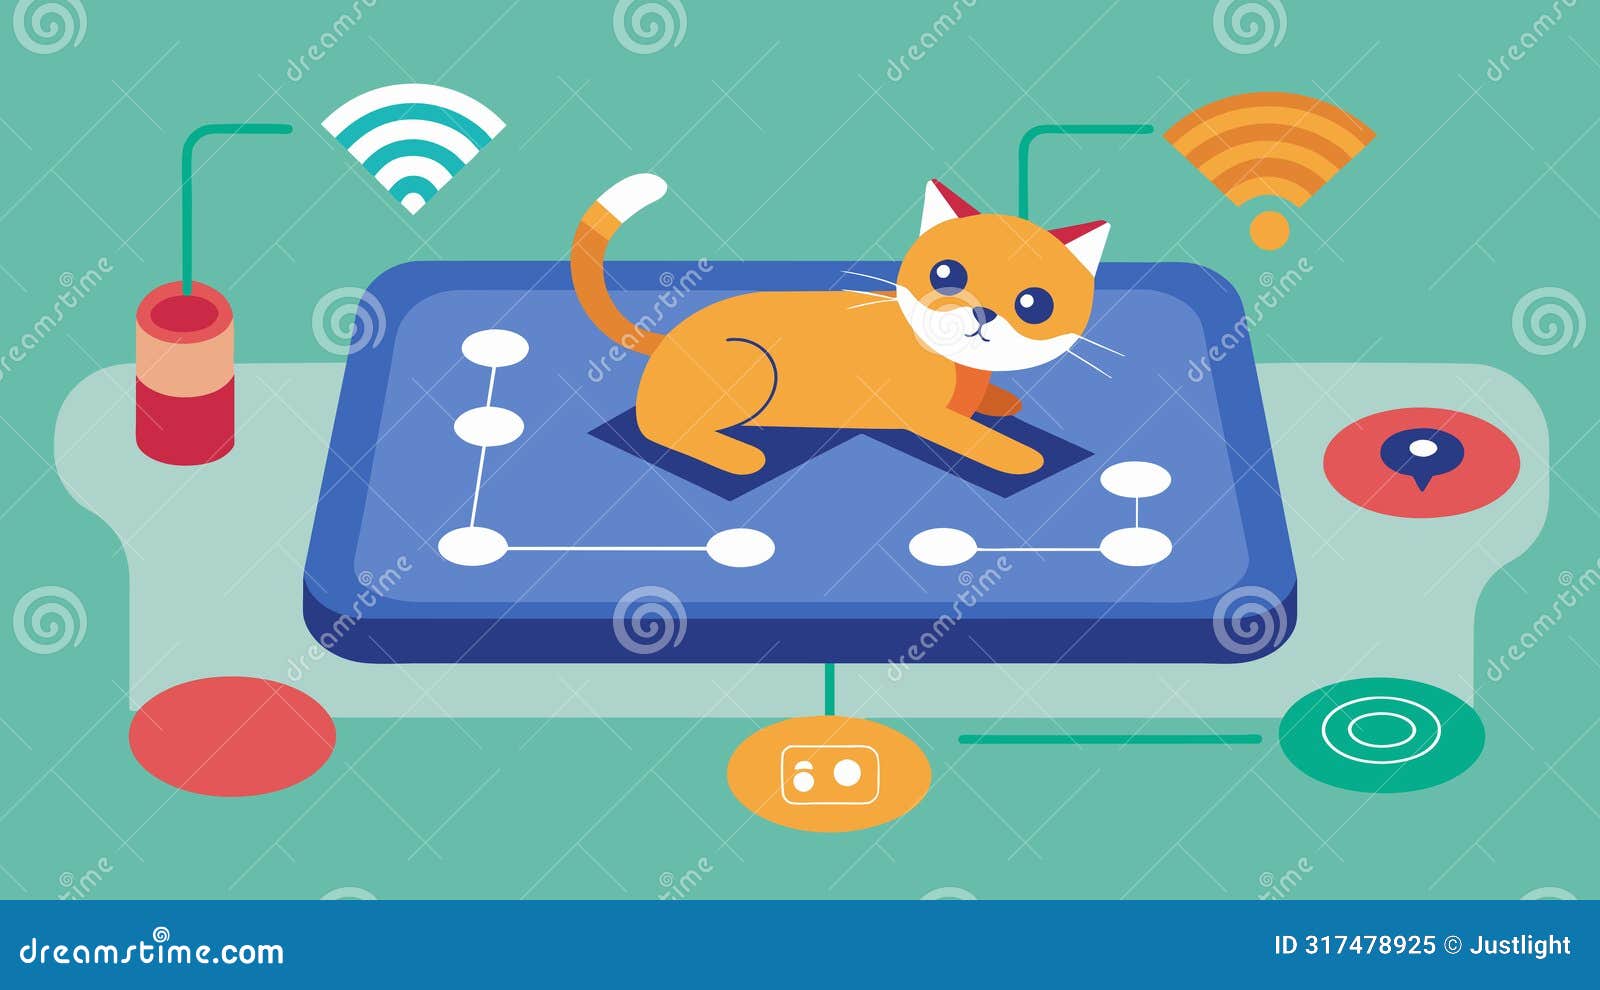 a stateoftheart play mat that uses sensors to map out your pets play patterns and suggests different games to keep them